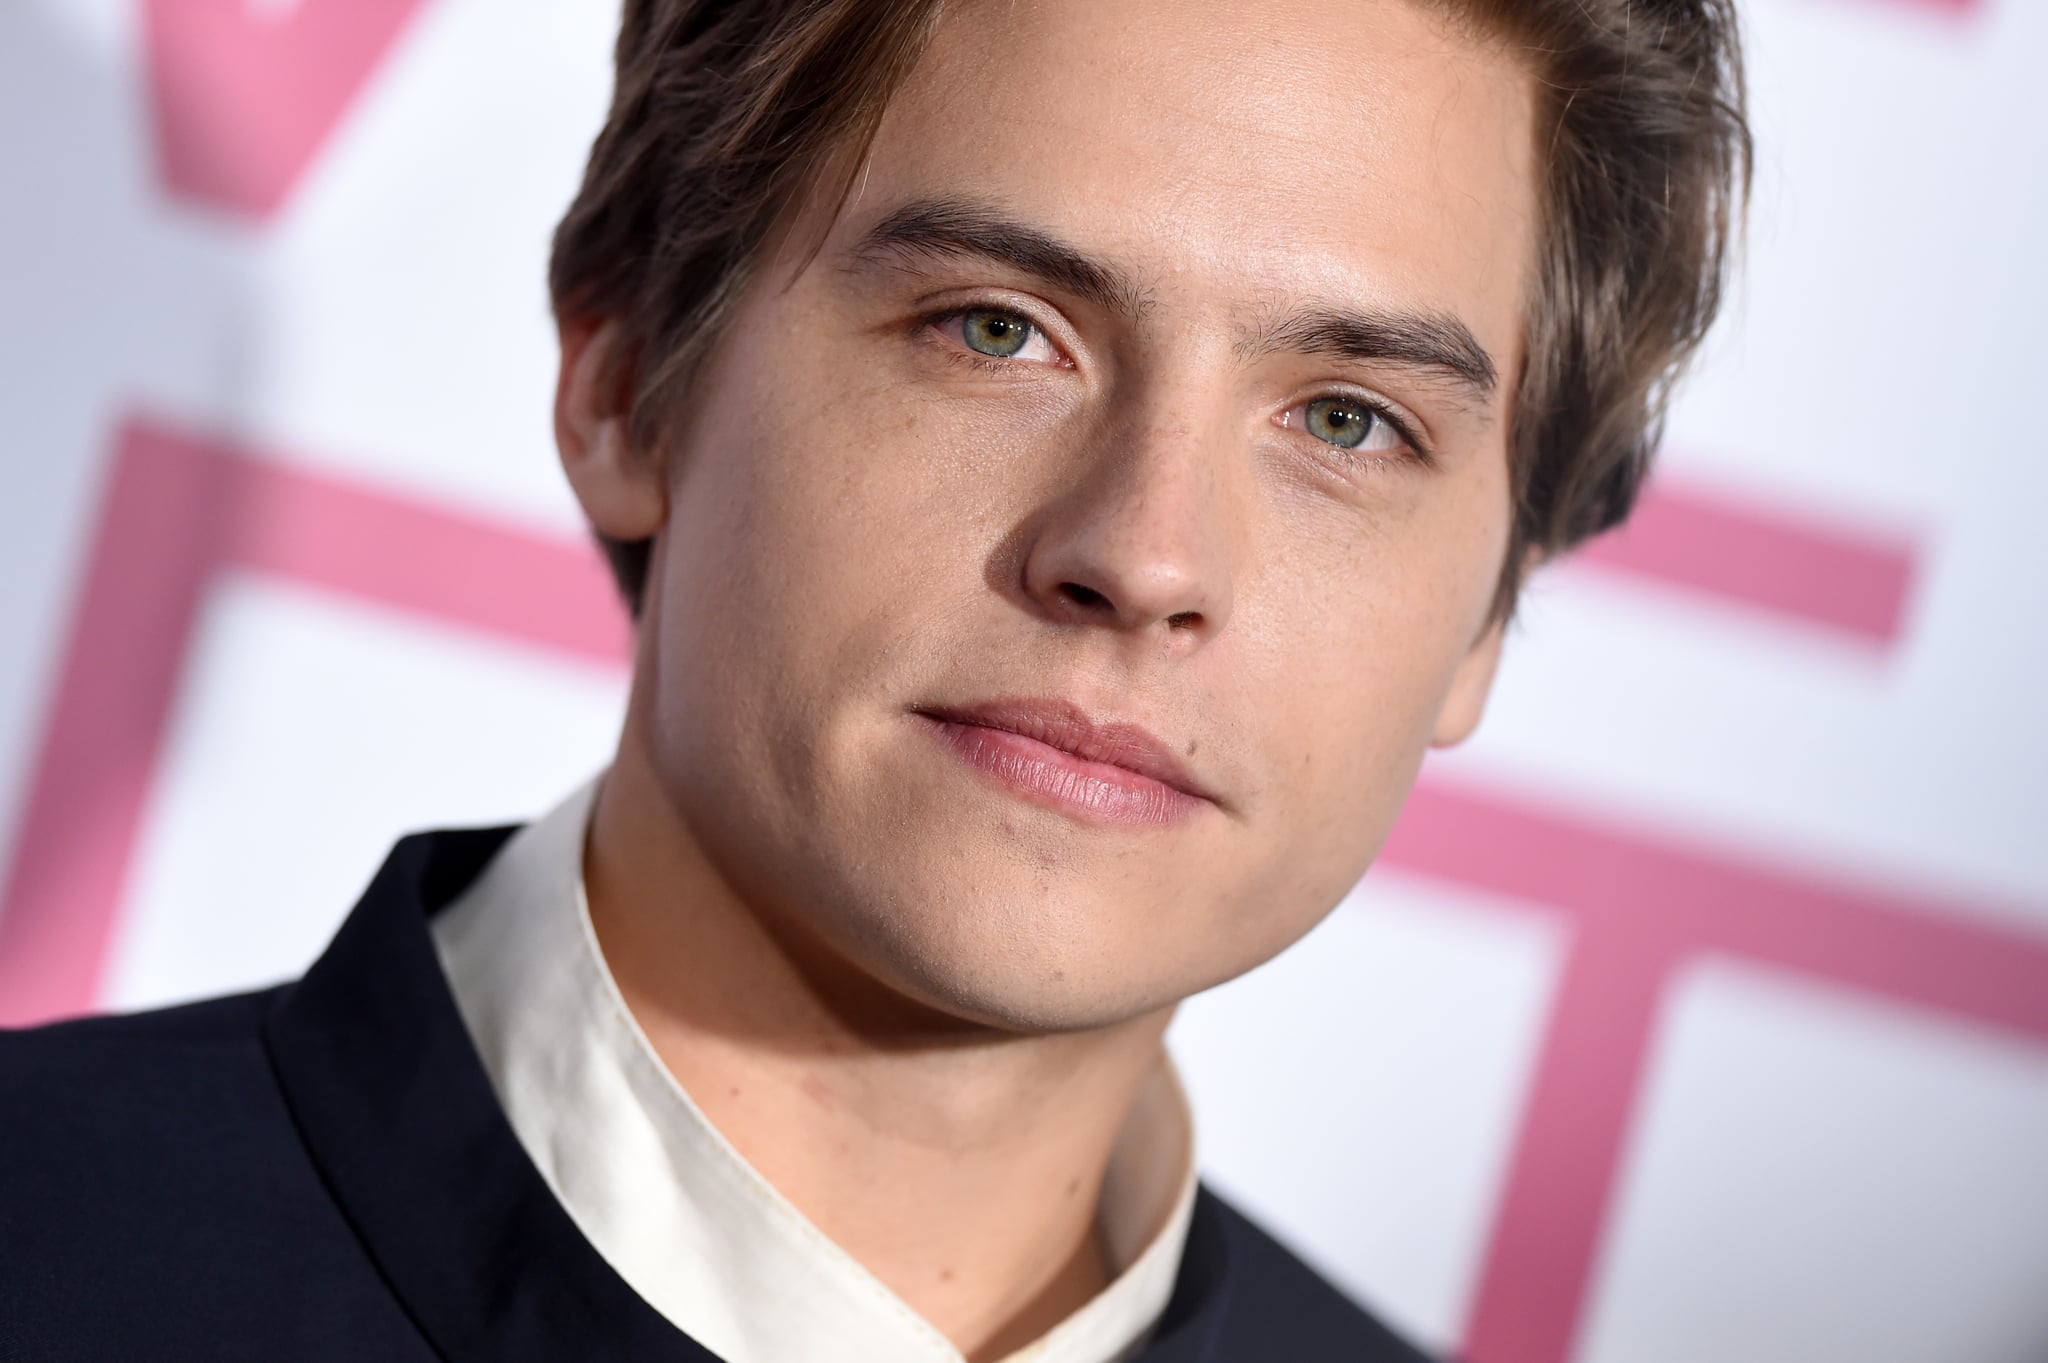 LOS ANGELES, CALIFORNIA - MARCH 07: Dylan Sprouse attends the premiere of Lionsgate's 'Five Feet Apart' at Fox Bruin Theatre on March 07, 2019 in Los Angeles, California. (Photo by Axelle/Bauer-Griffin/FilmMagic)